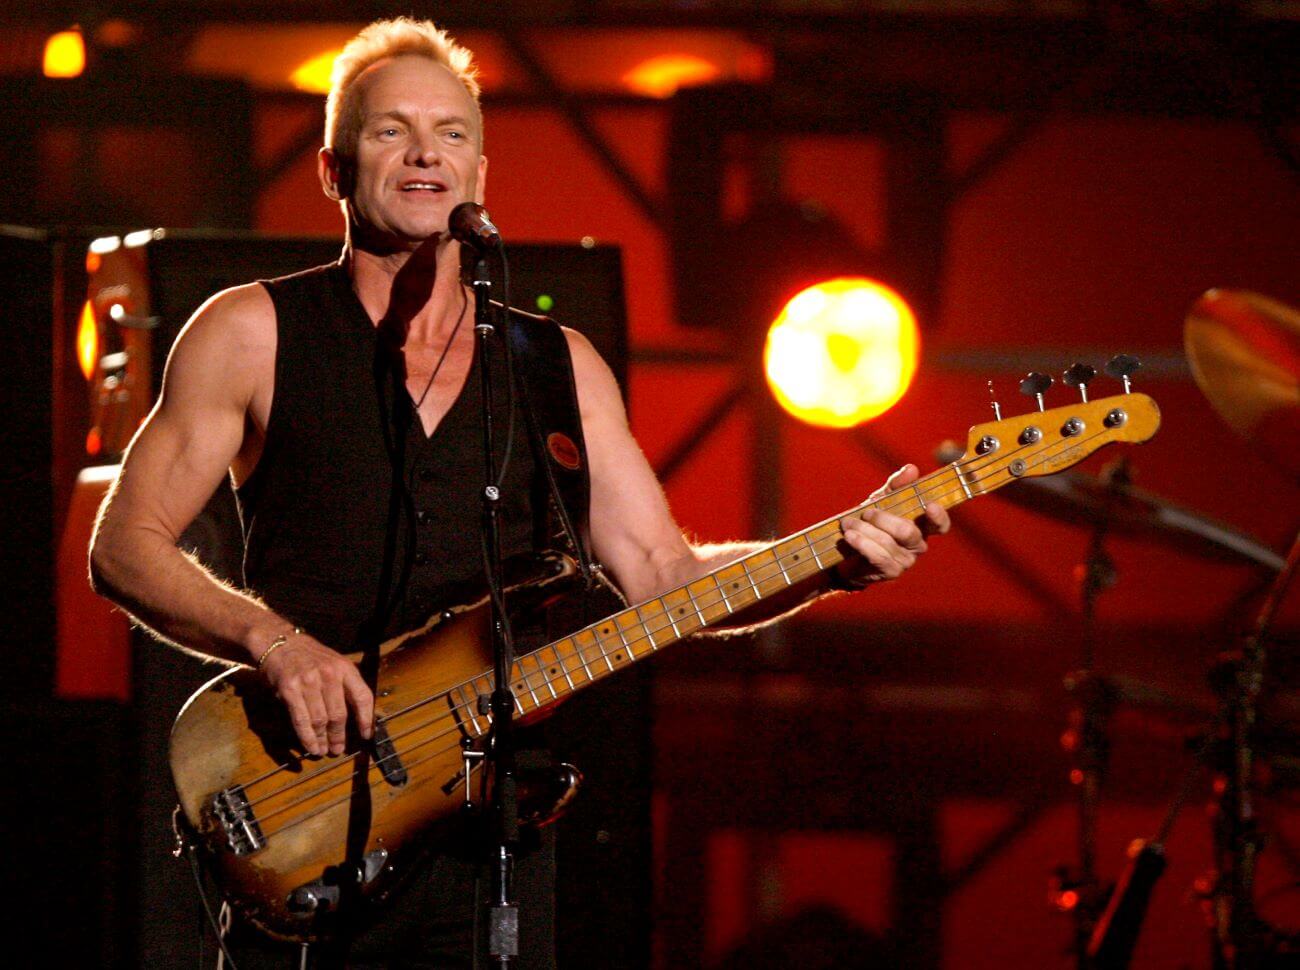 Sting wears a tank top and plays the electric guitar.